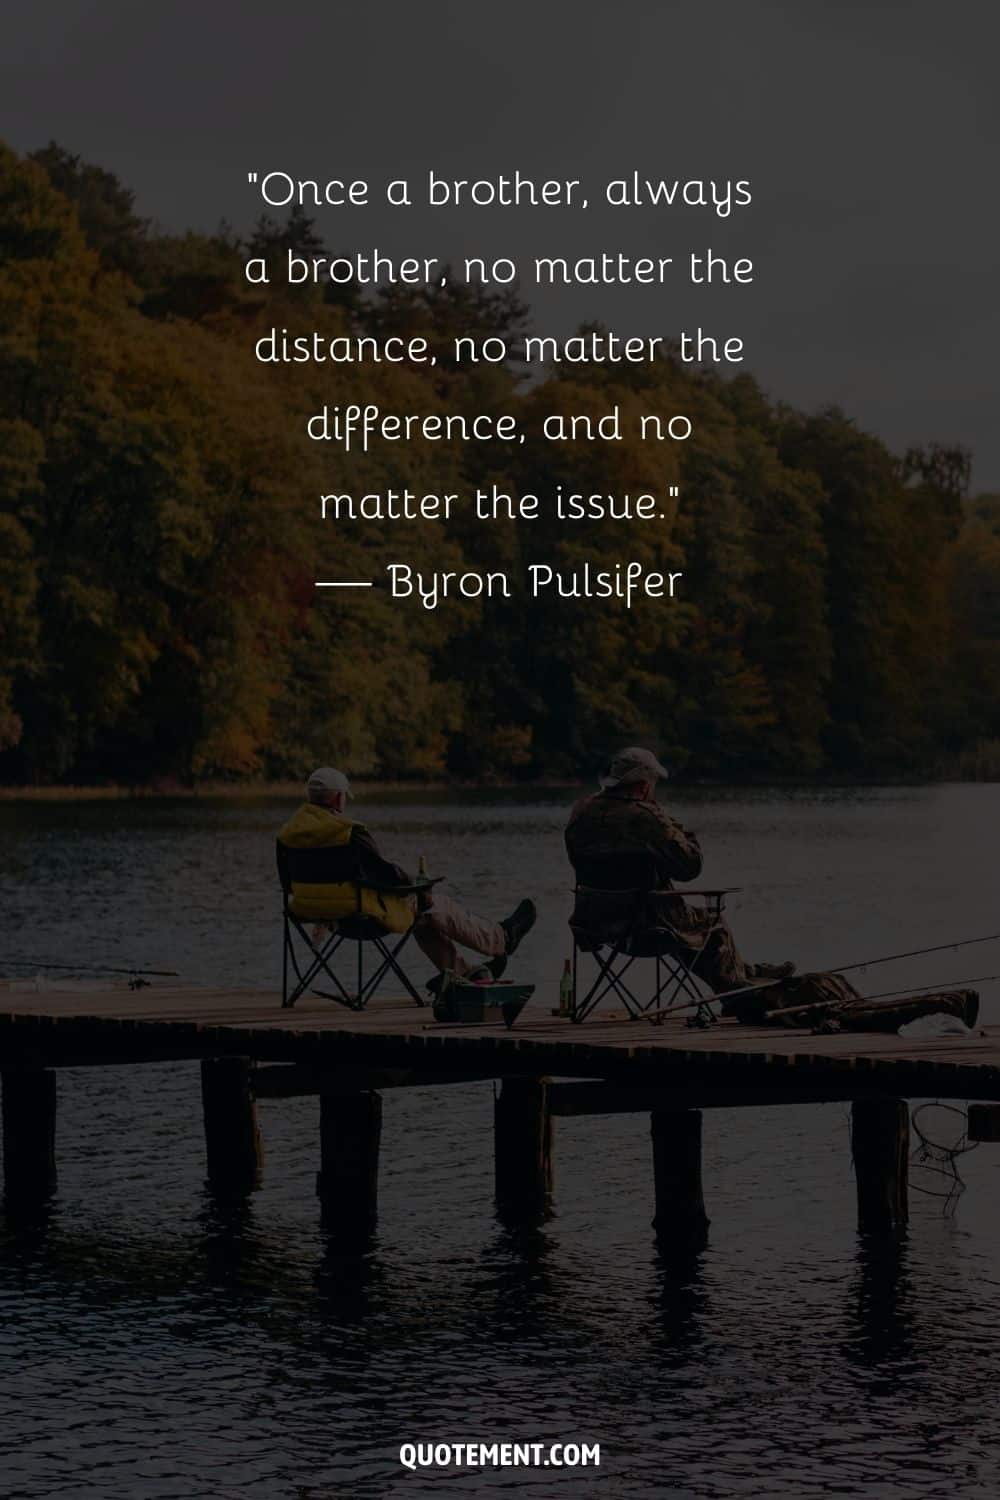 “Once a brother, always a brother, no matter the distance, no matter the difference, and no matter the issue.” — Byron Pulsifer